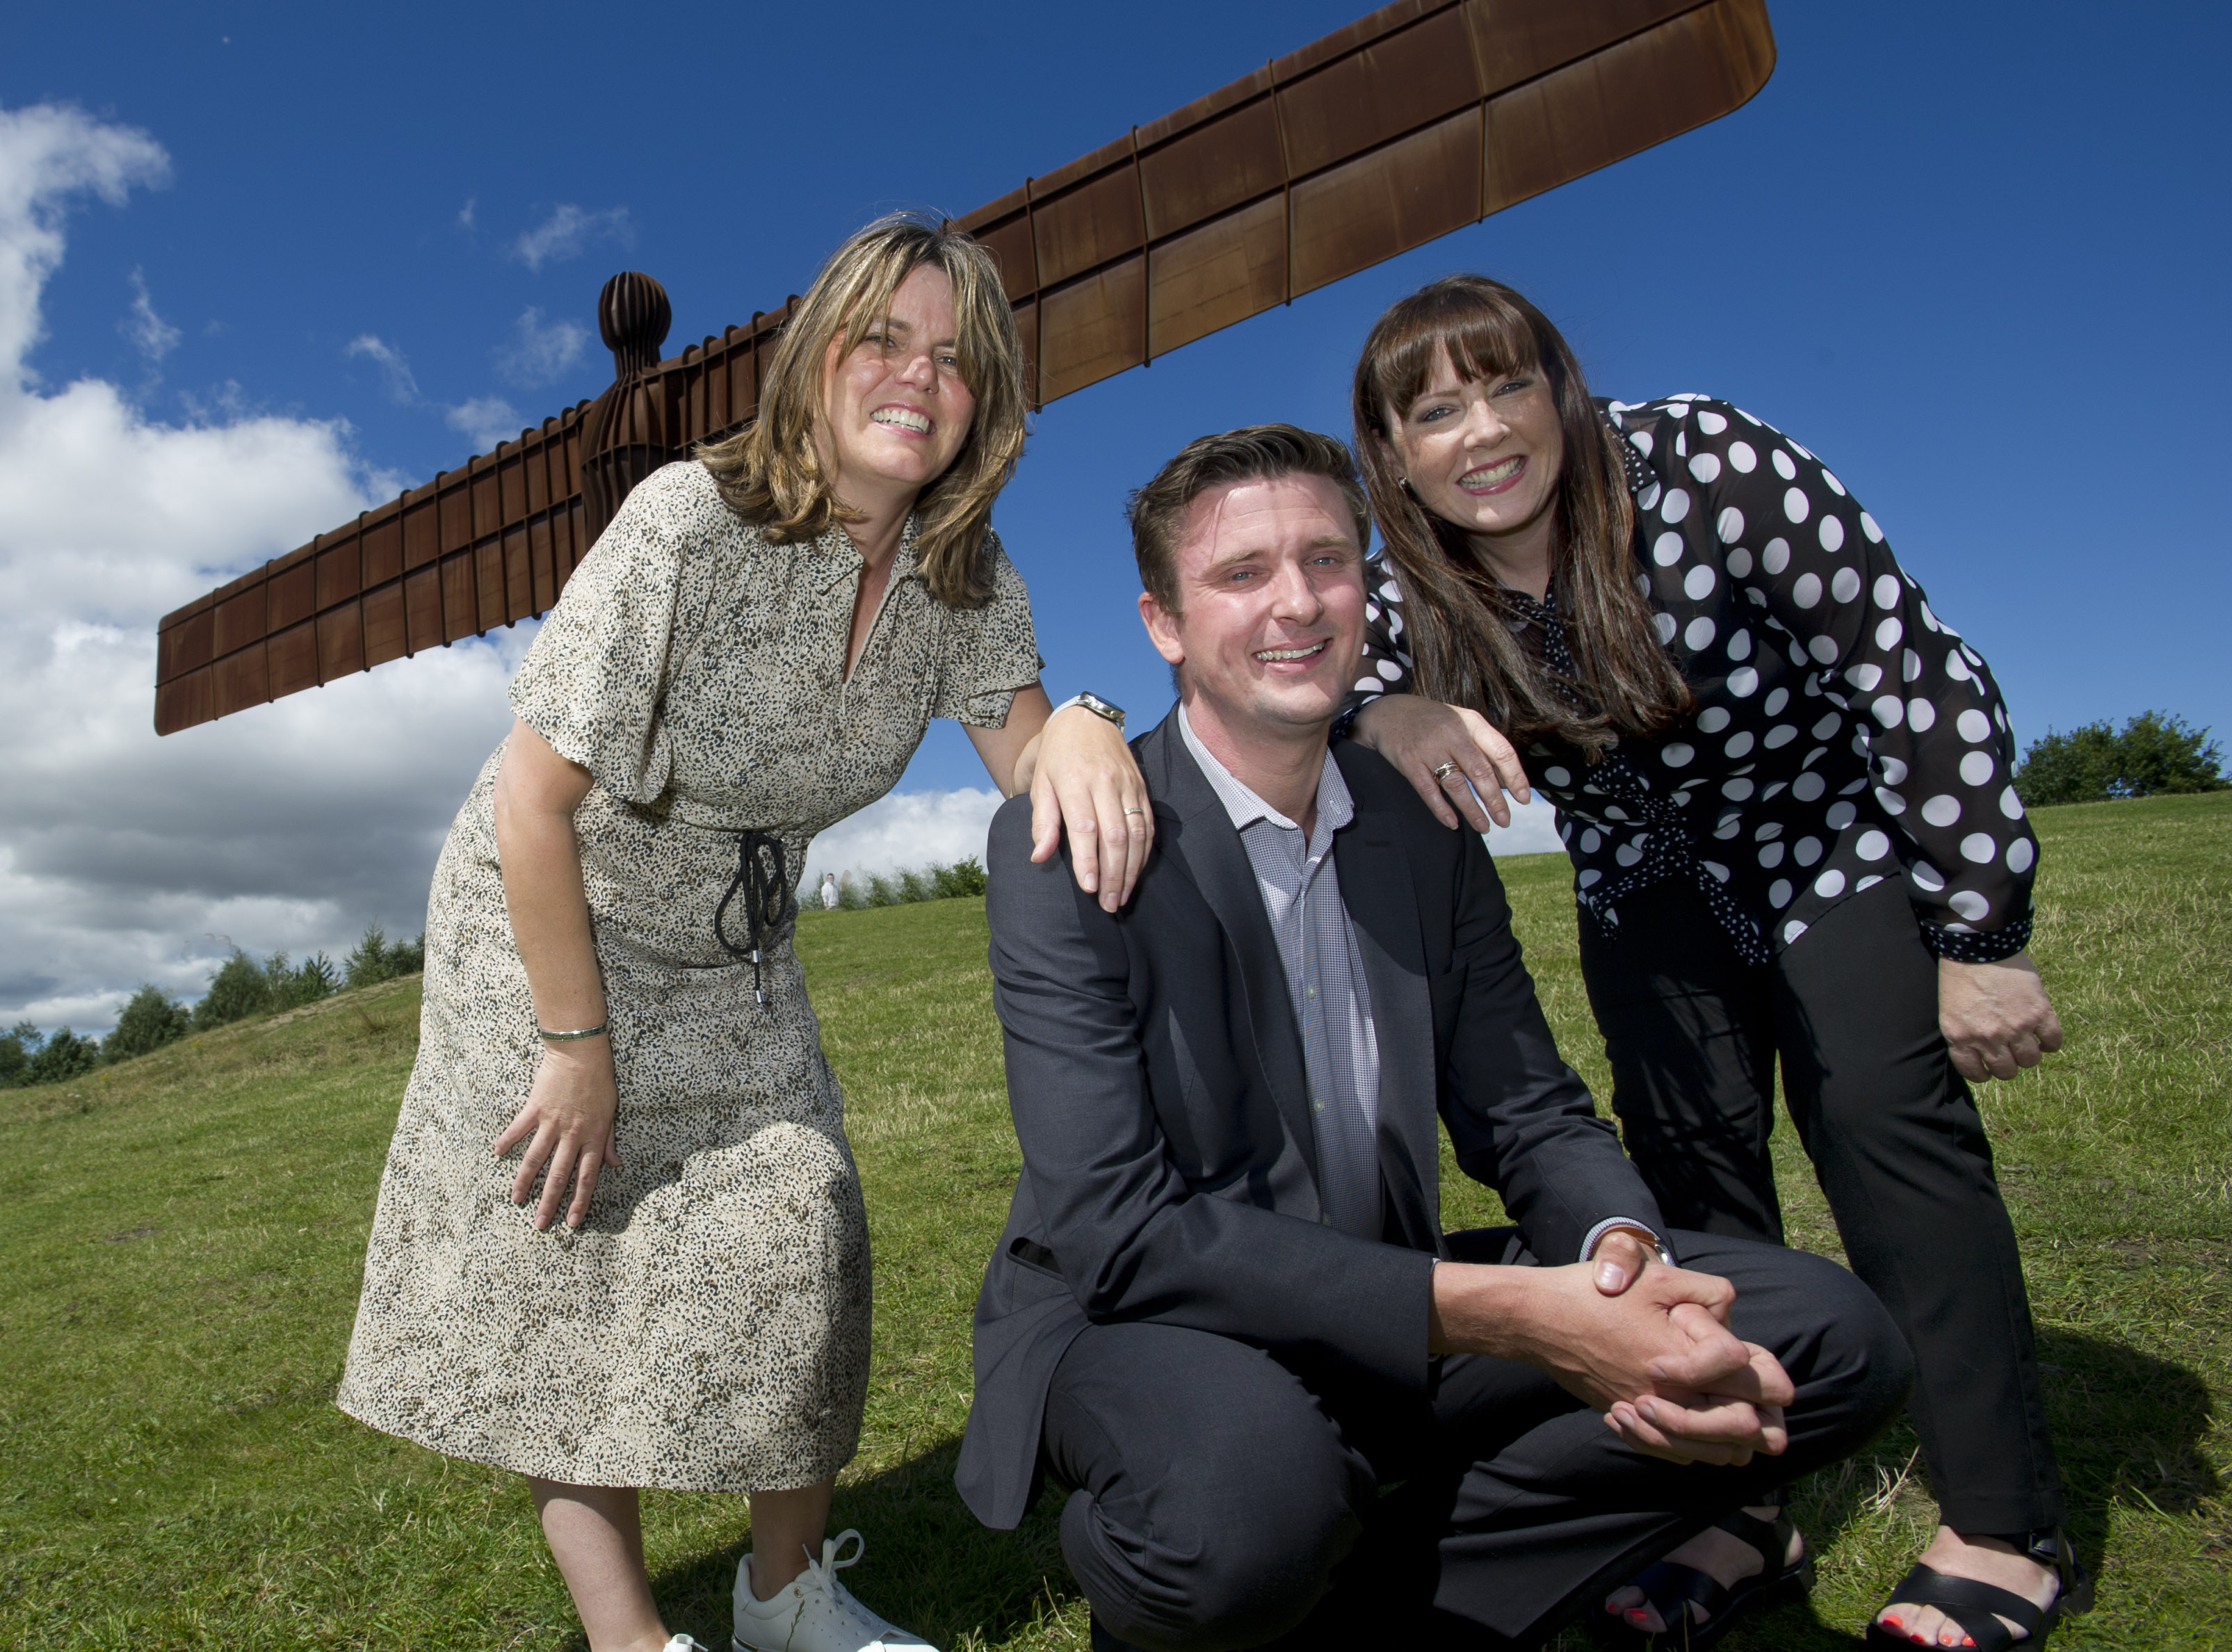 L- R: Sharon, David and Valerie smiling at the camera standing in front of the Angel of the North.